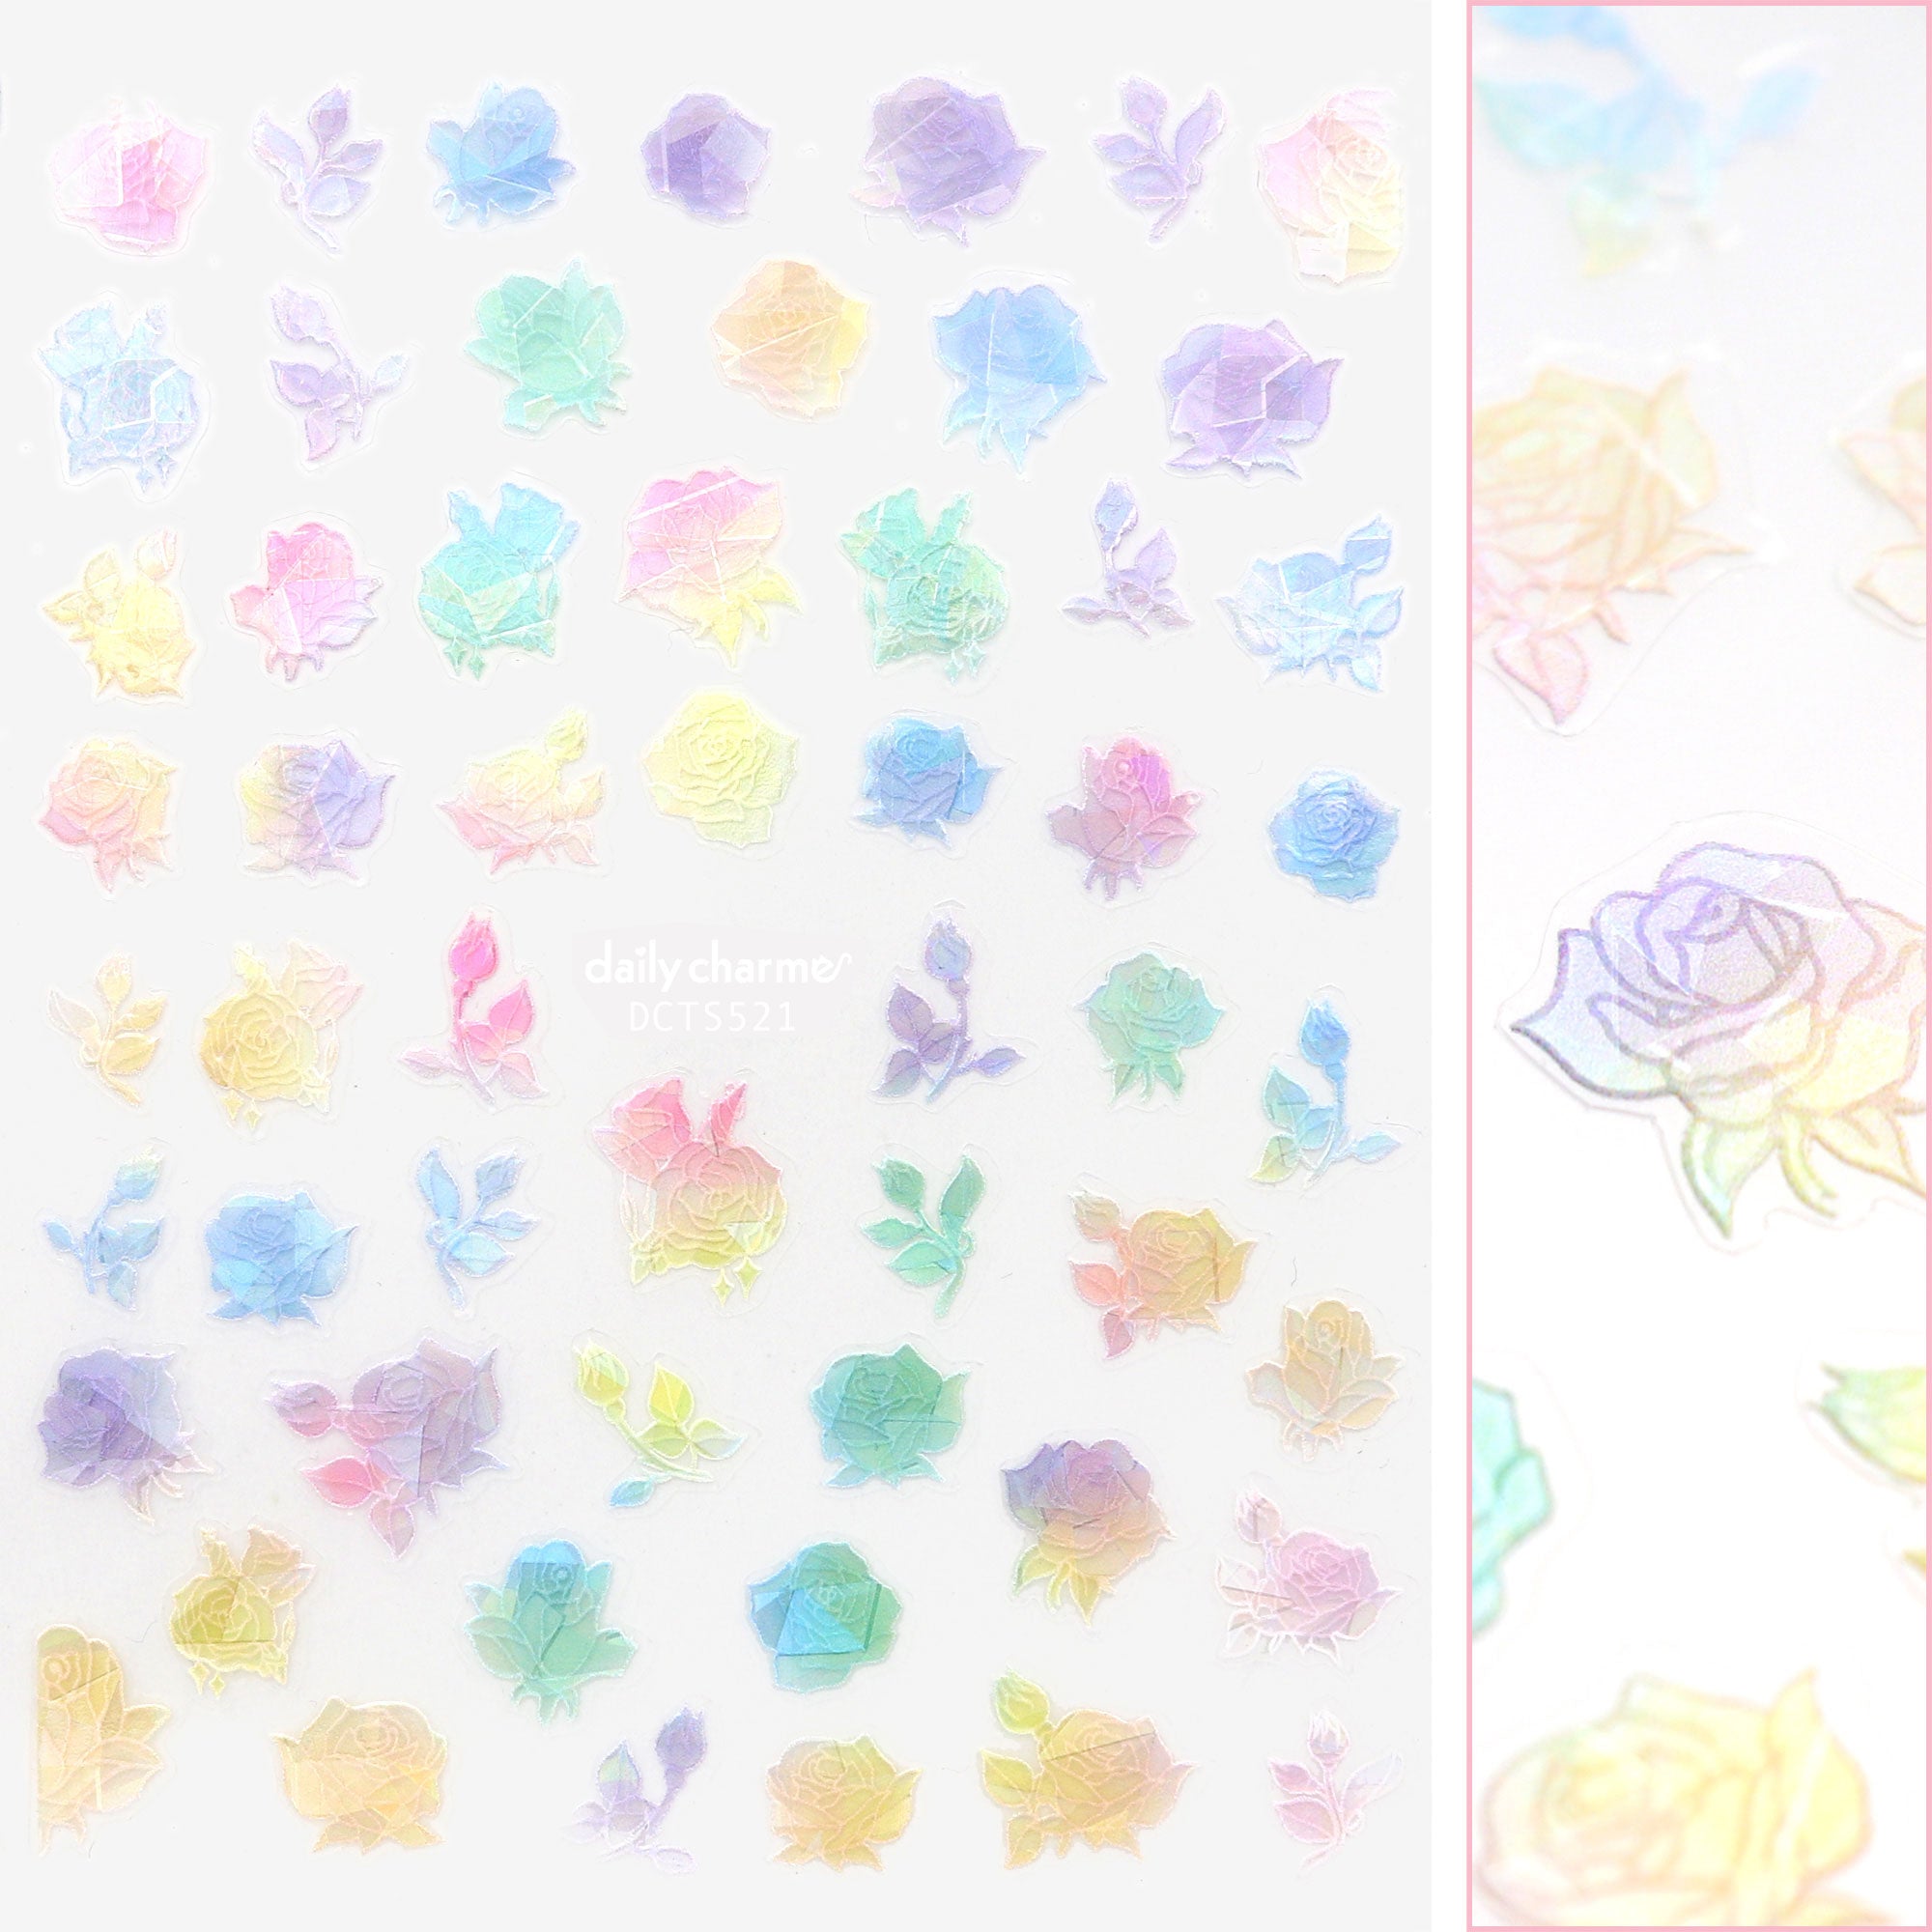 Floral Nail Art Sticker / Iridescent Roses / Colorful Rainbow Flower Cute Decal